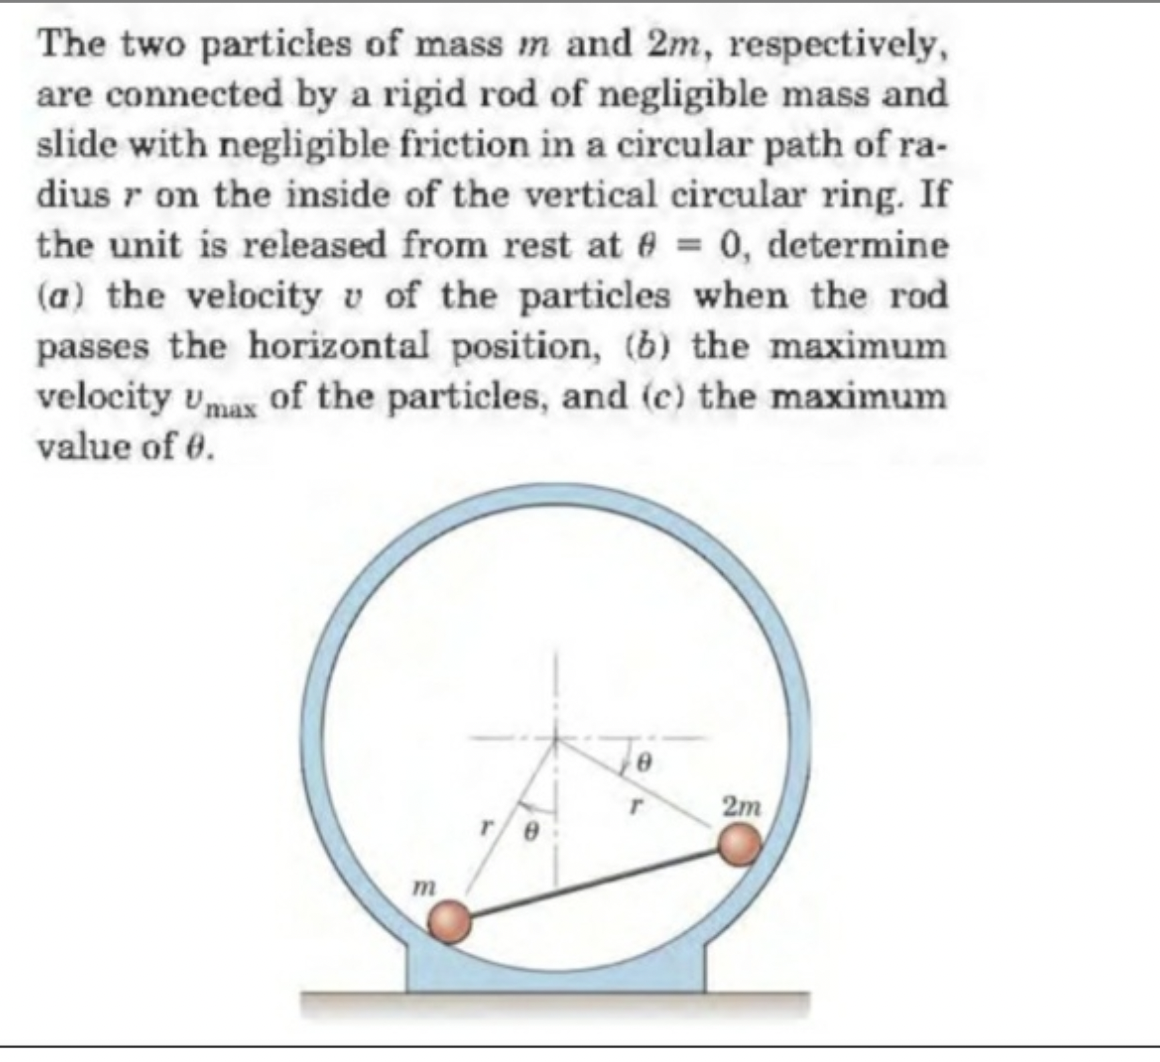 The two particles of mass m and 2m, respectively,
are connected by a rigid rod of negligible mass and
slide with negligible friction in a circular path of ra-
dius r on the inside of the vertical circular ring. If
the unit is released from rest at 8 = 0, determine
(a) the velocity v of the particles when the rod
passes the horizontal position, (b) the maximum
velocity Umax of the particles, and (c) the maximum
value of 0.
m
8
r
2m